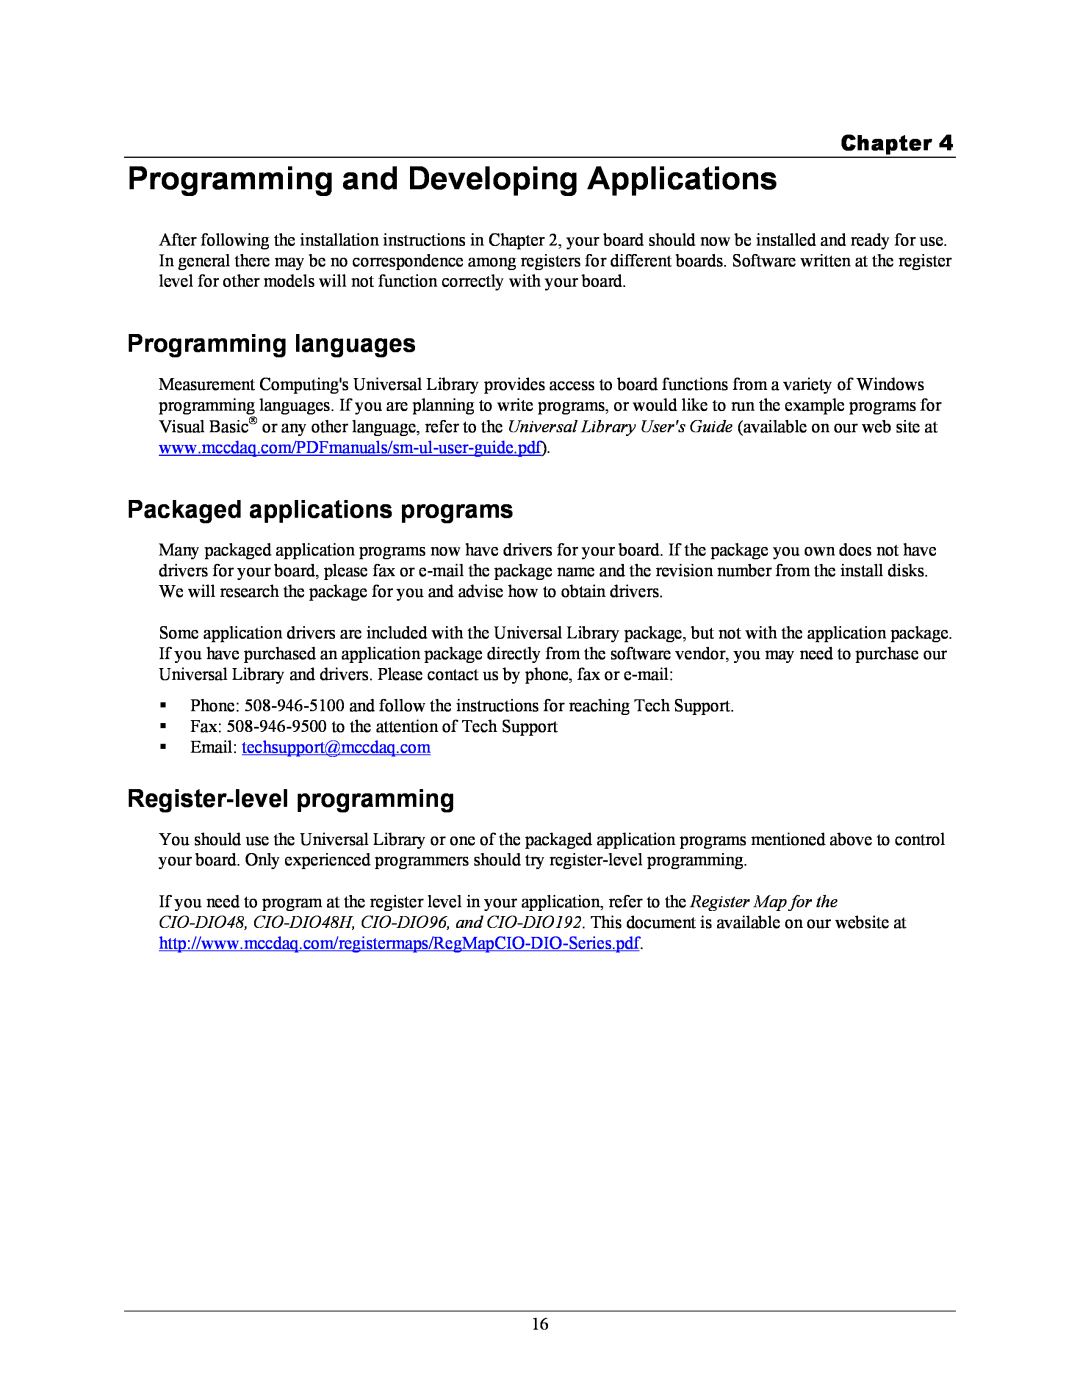 IBM CIO-DIO48H Programming and Developing Applications, Programming languages, Packaged applications programs, Chapter 